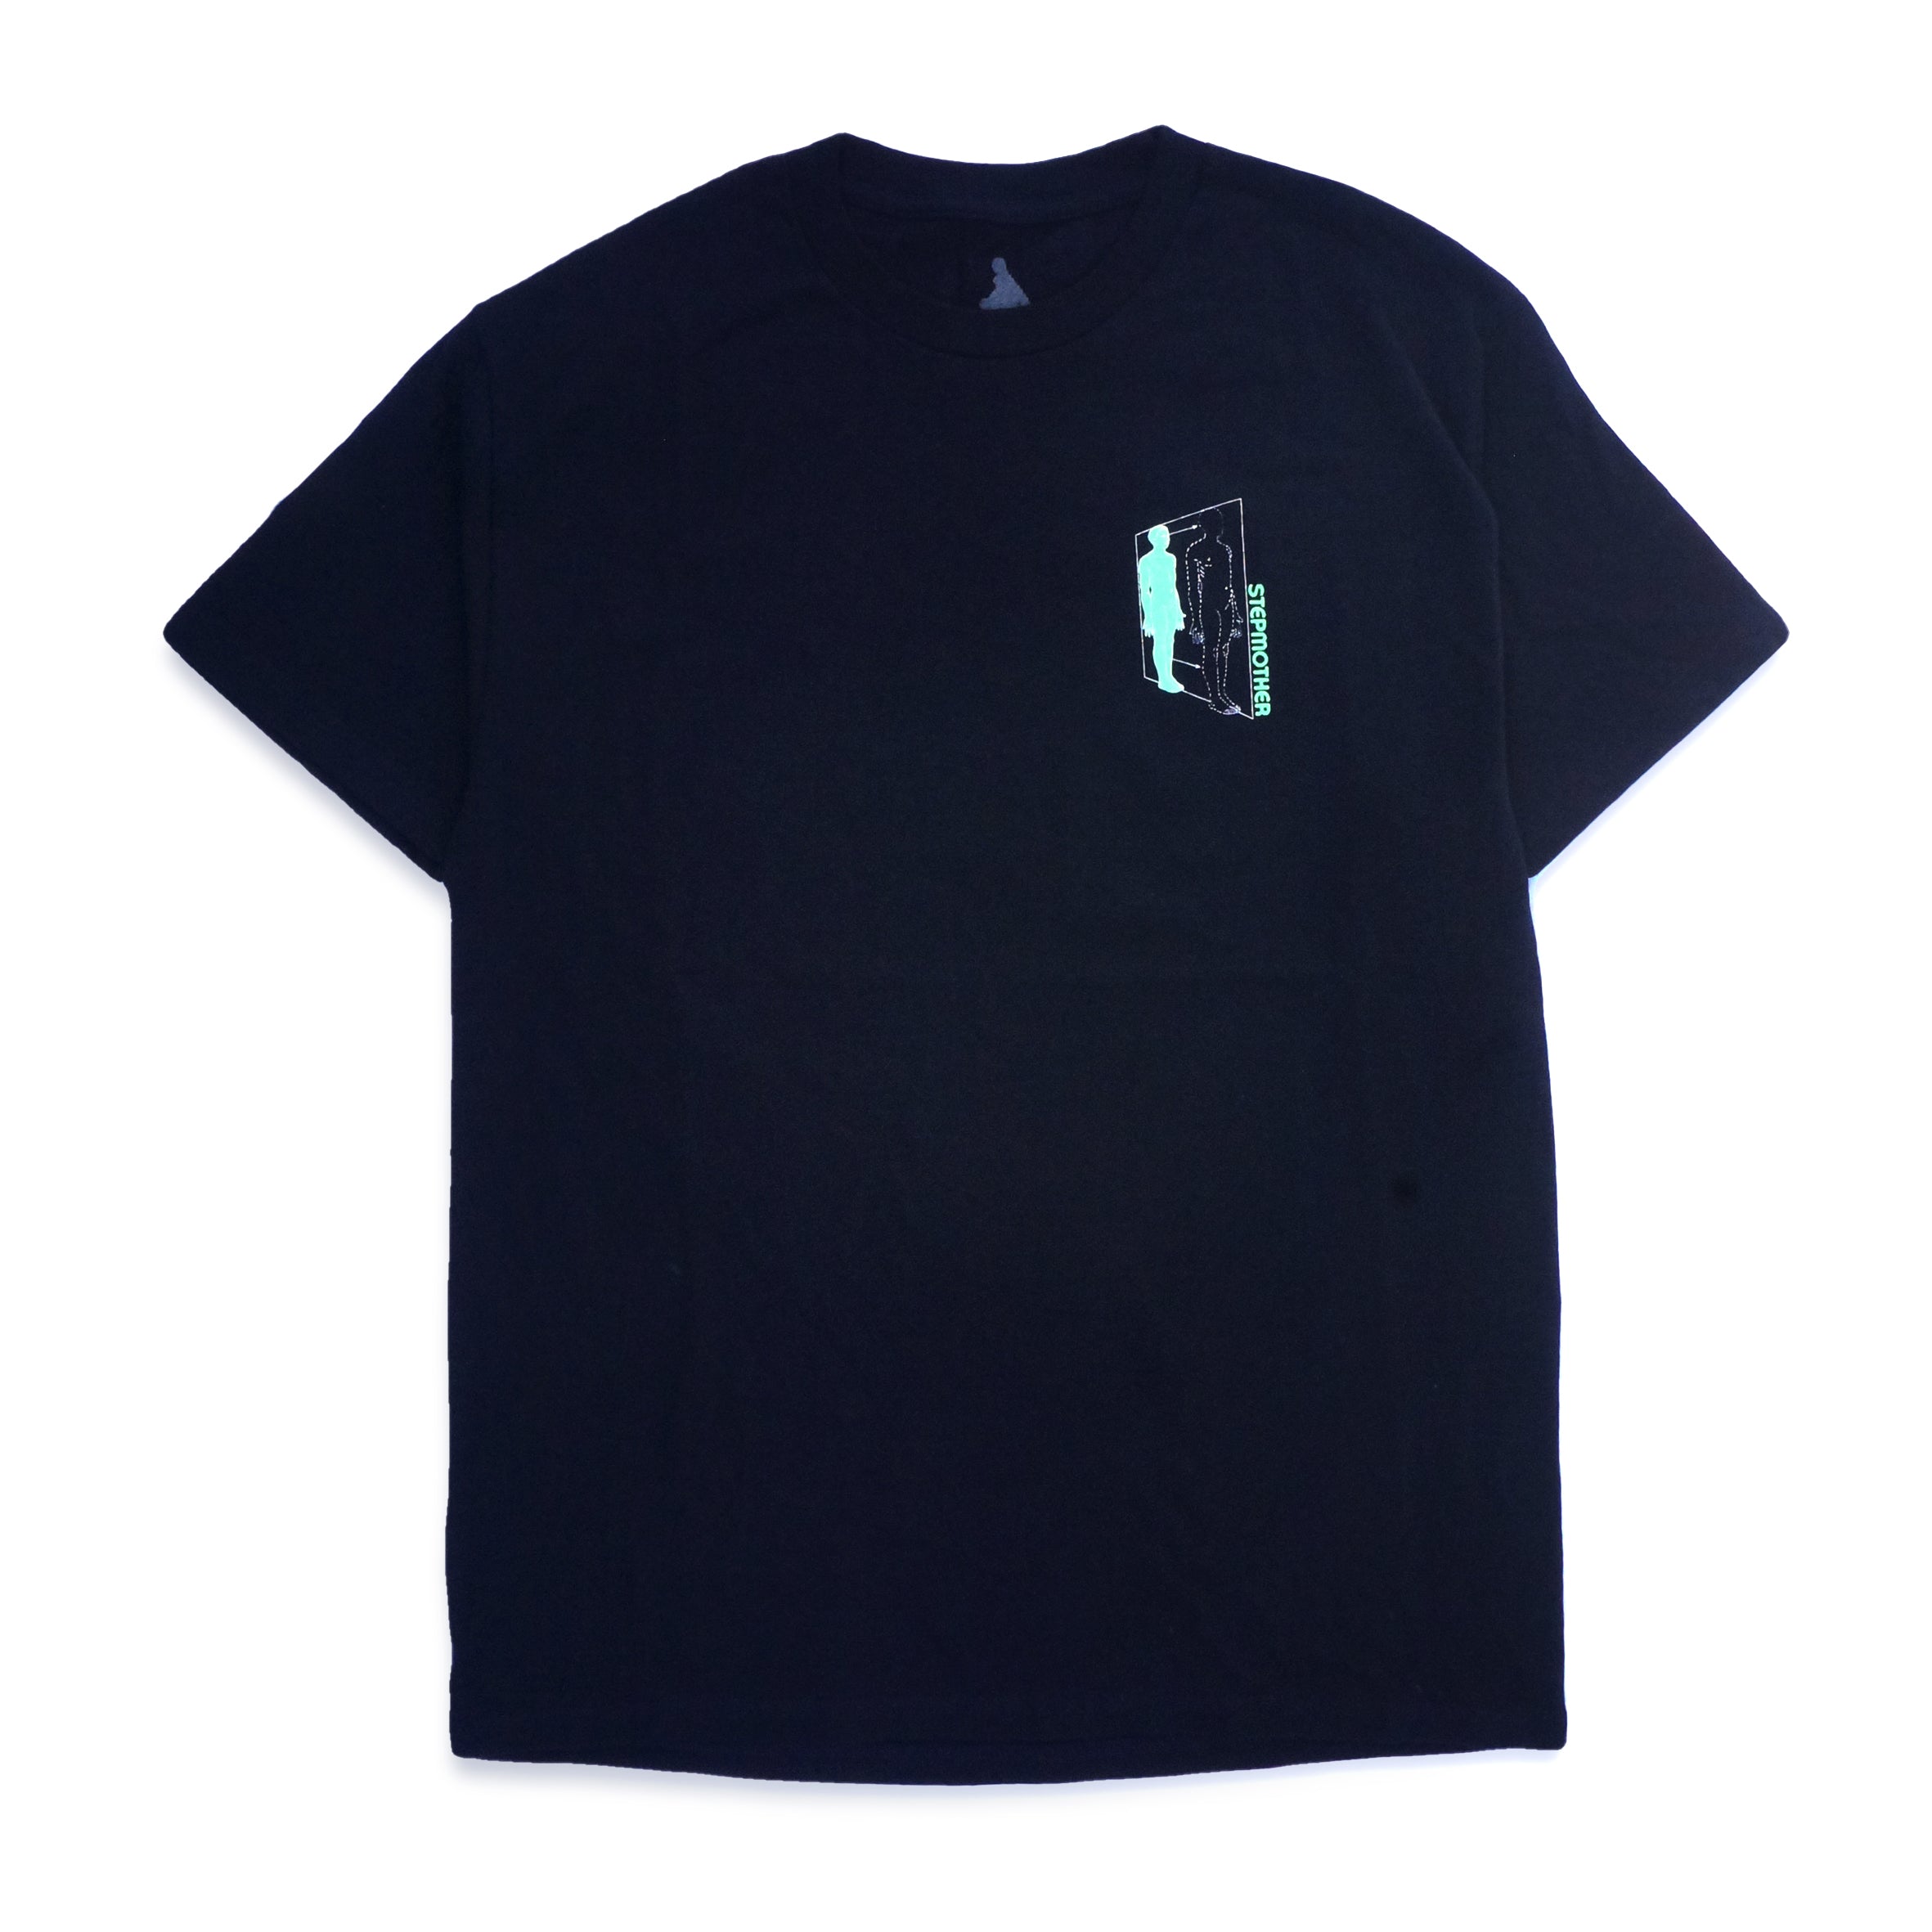 Day Spa T-shirt - Navy